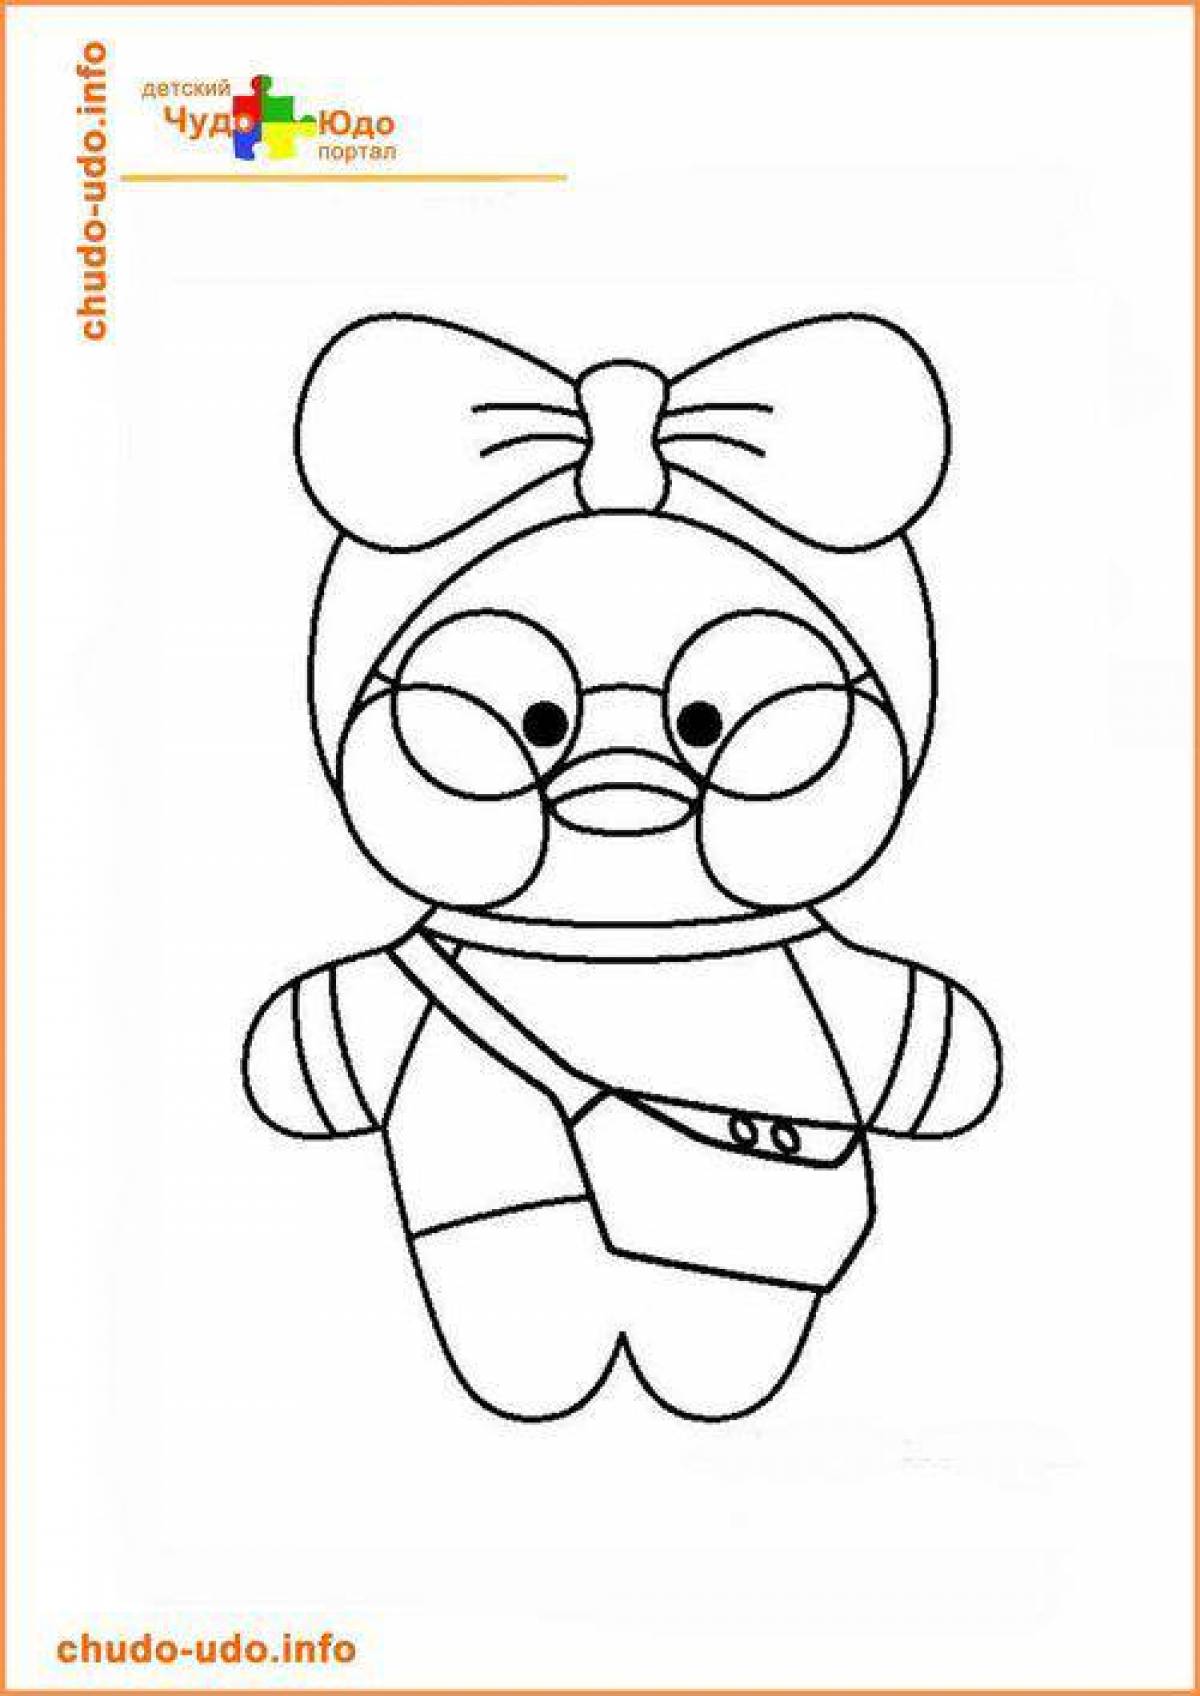 Lalafanfan shining duck coloring page